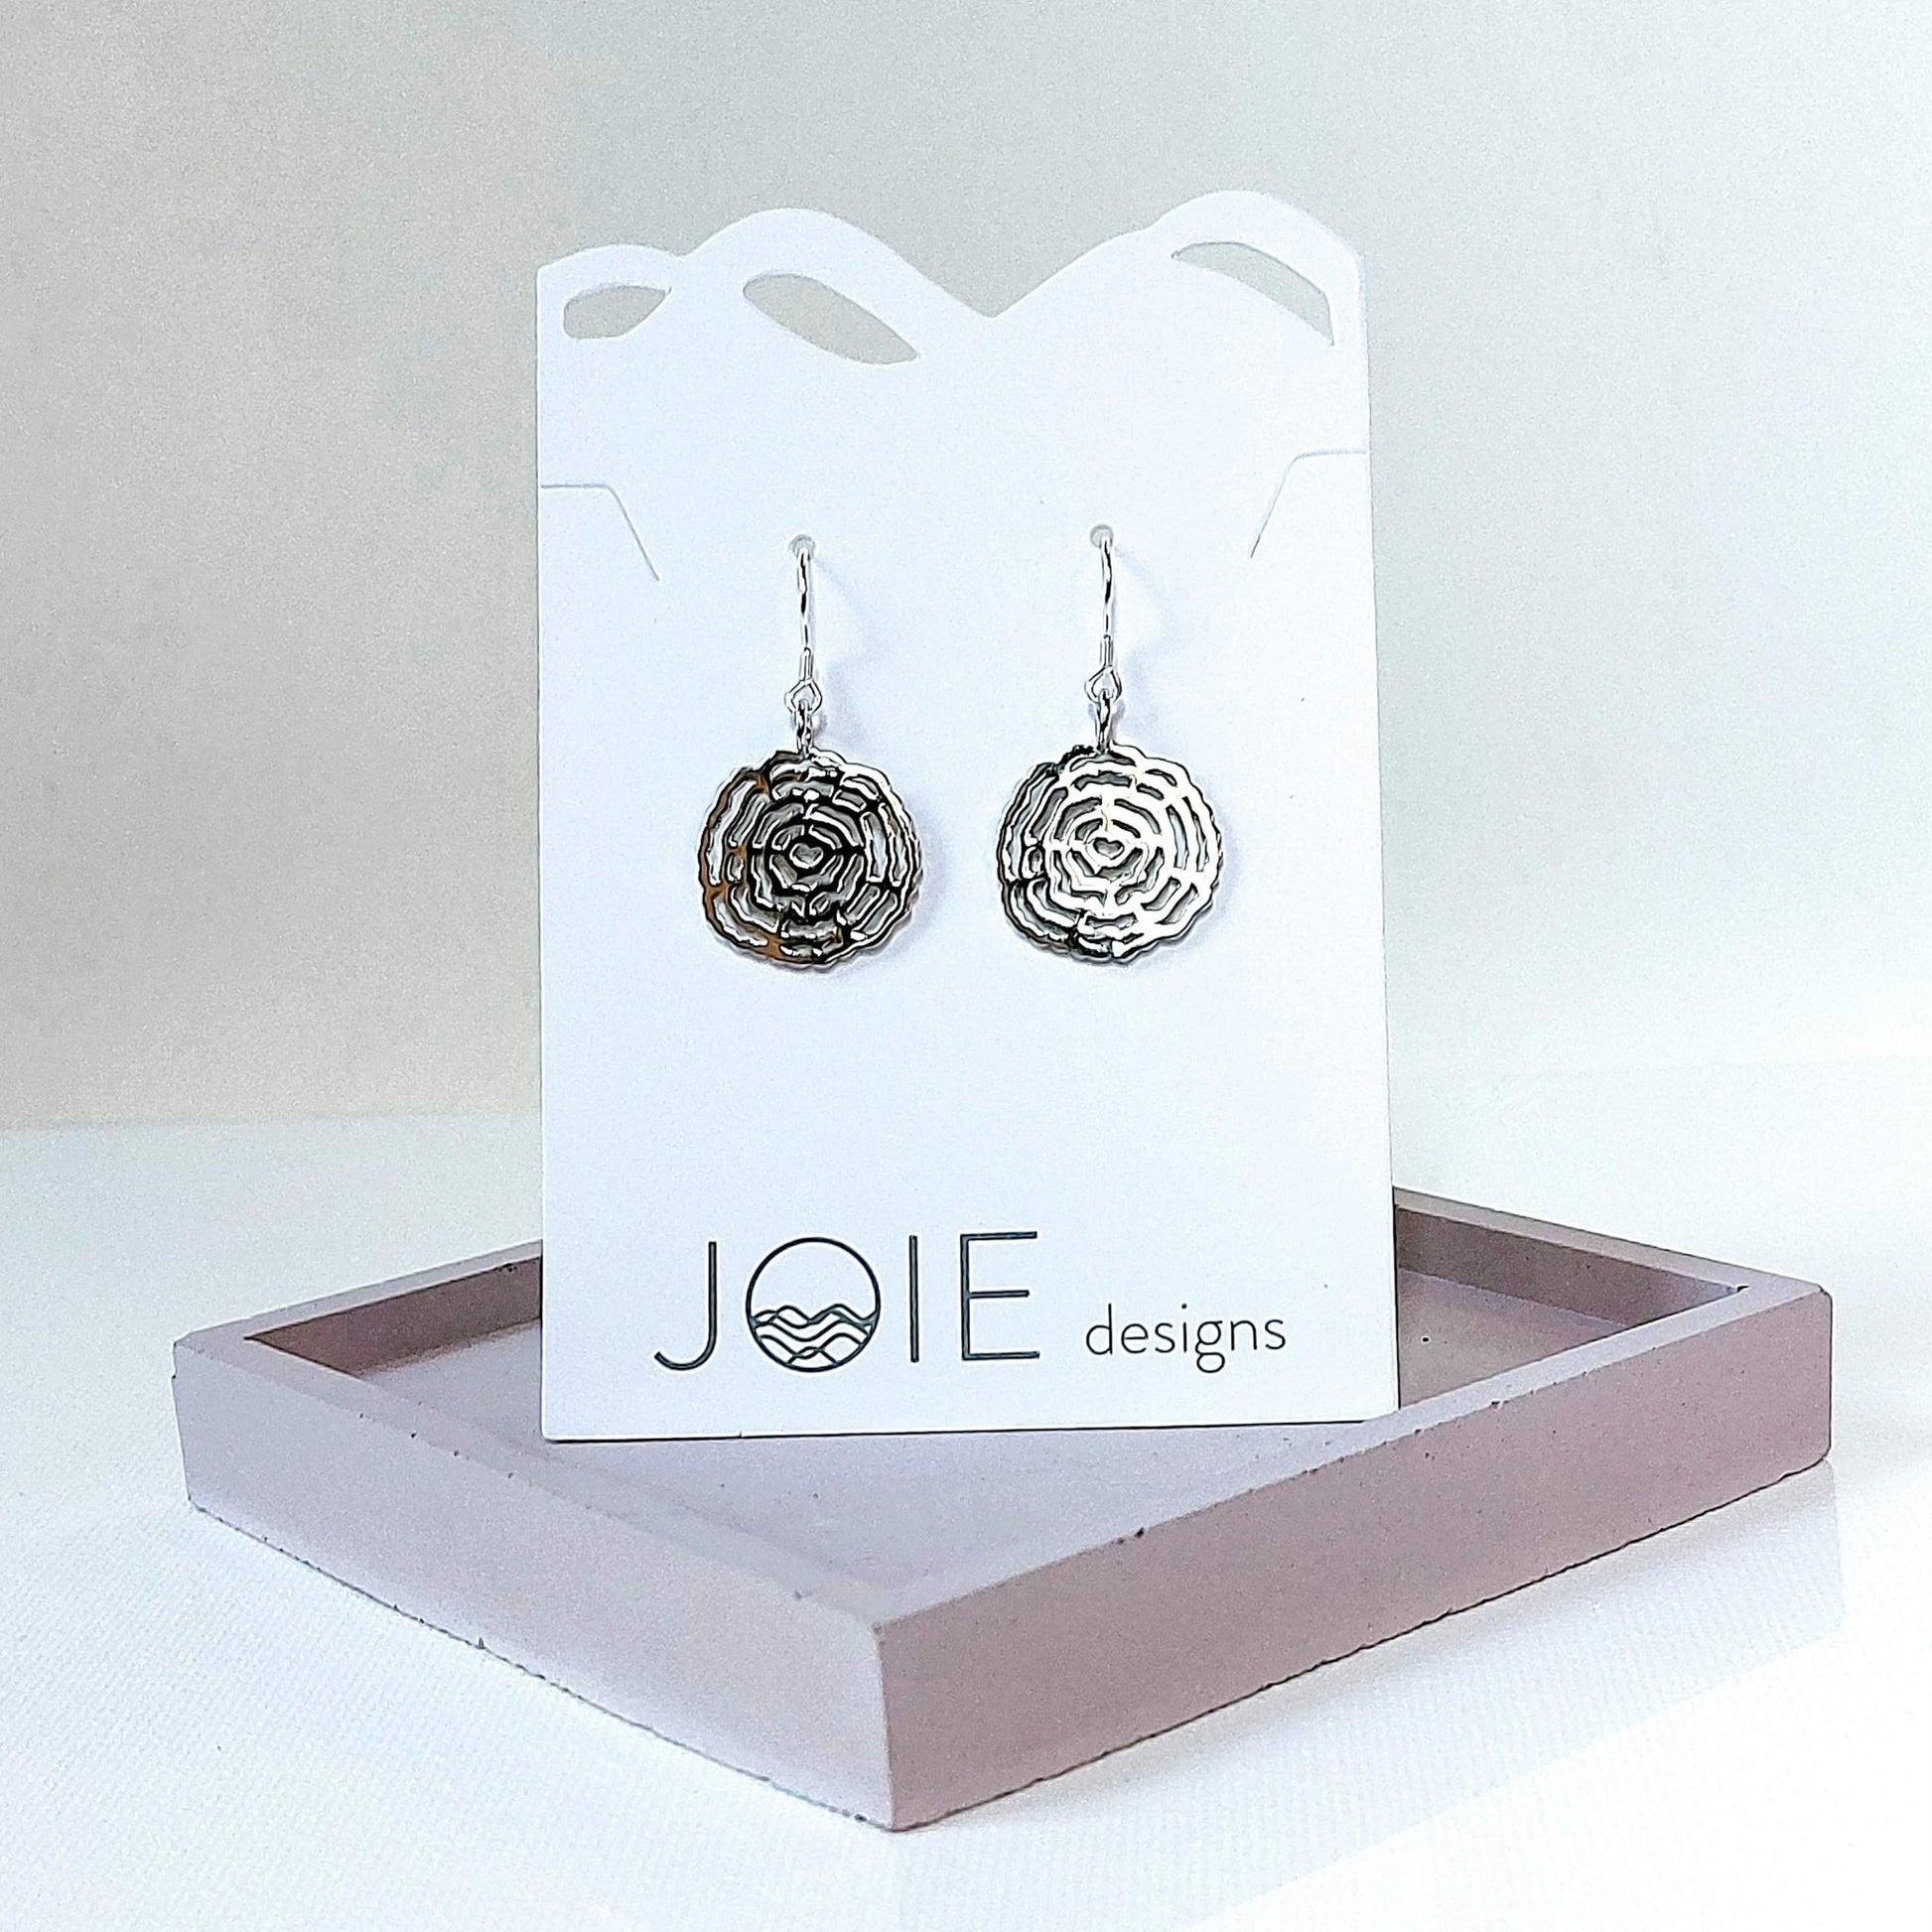 925 sterling silver tree ring inspired dangle earrings shown on a white jewellery card